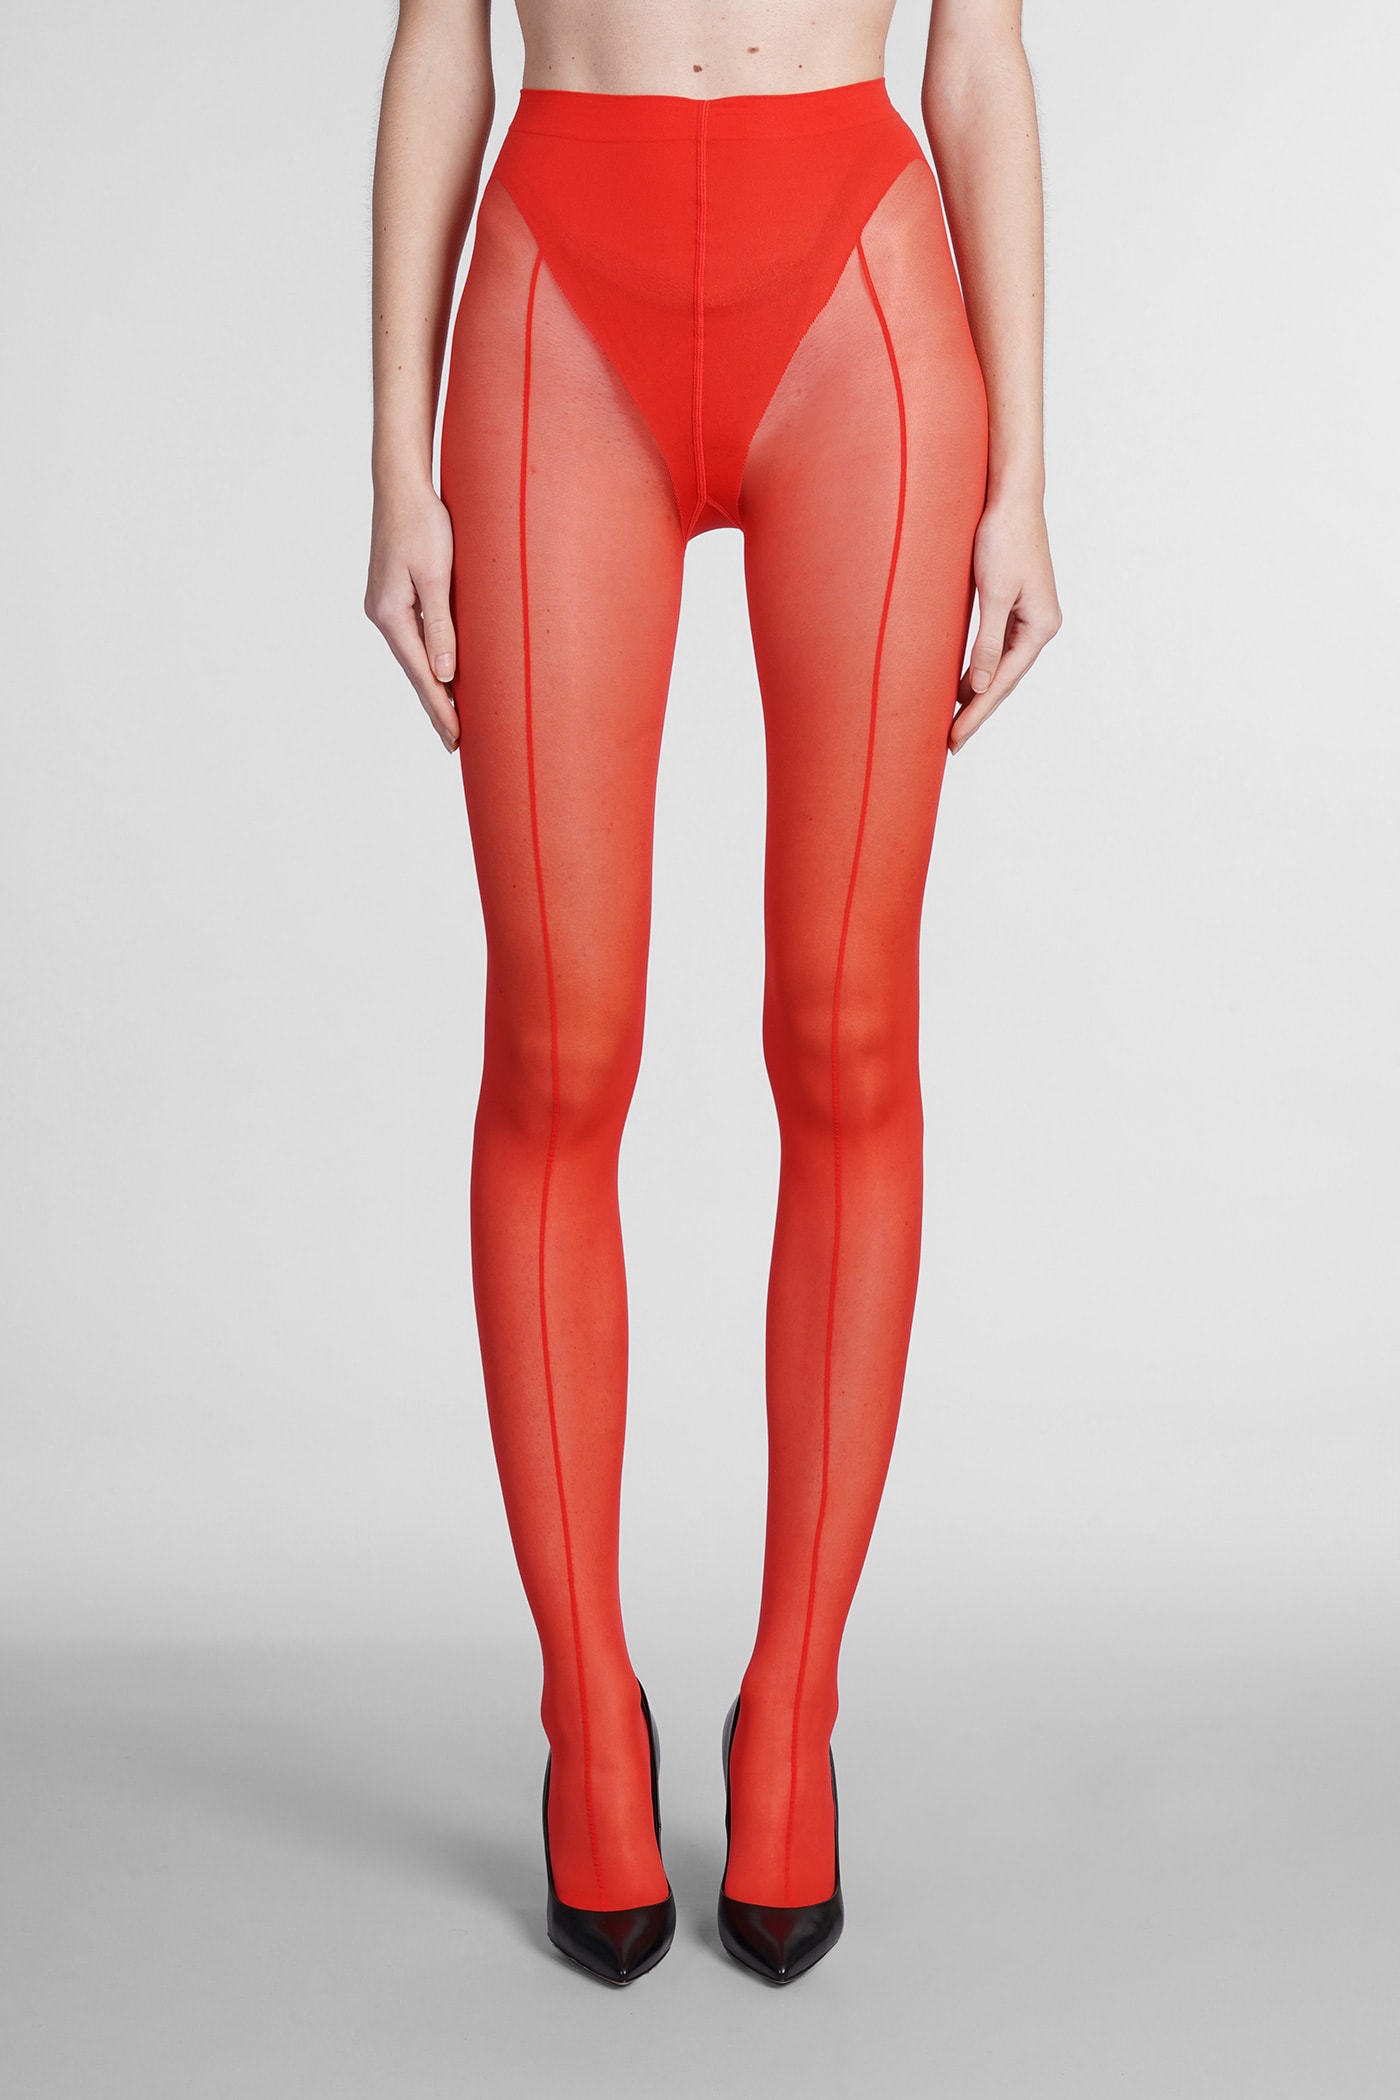 Wolford Lingerie In Red Nylon